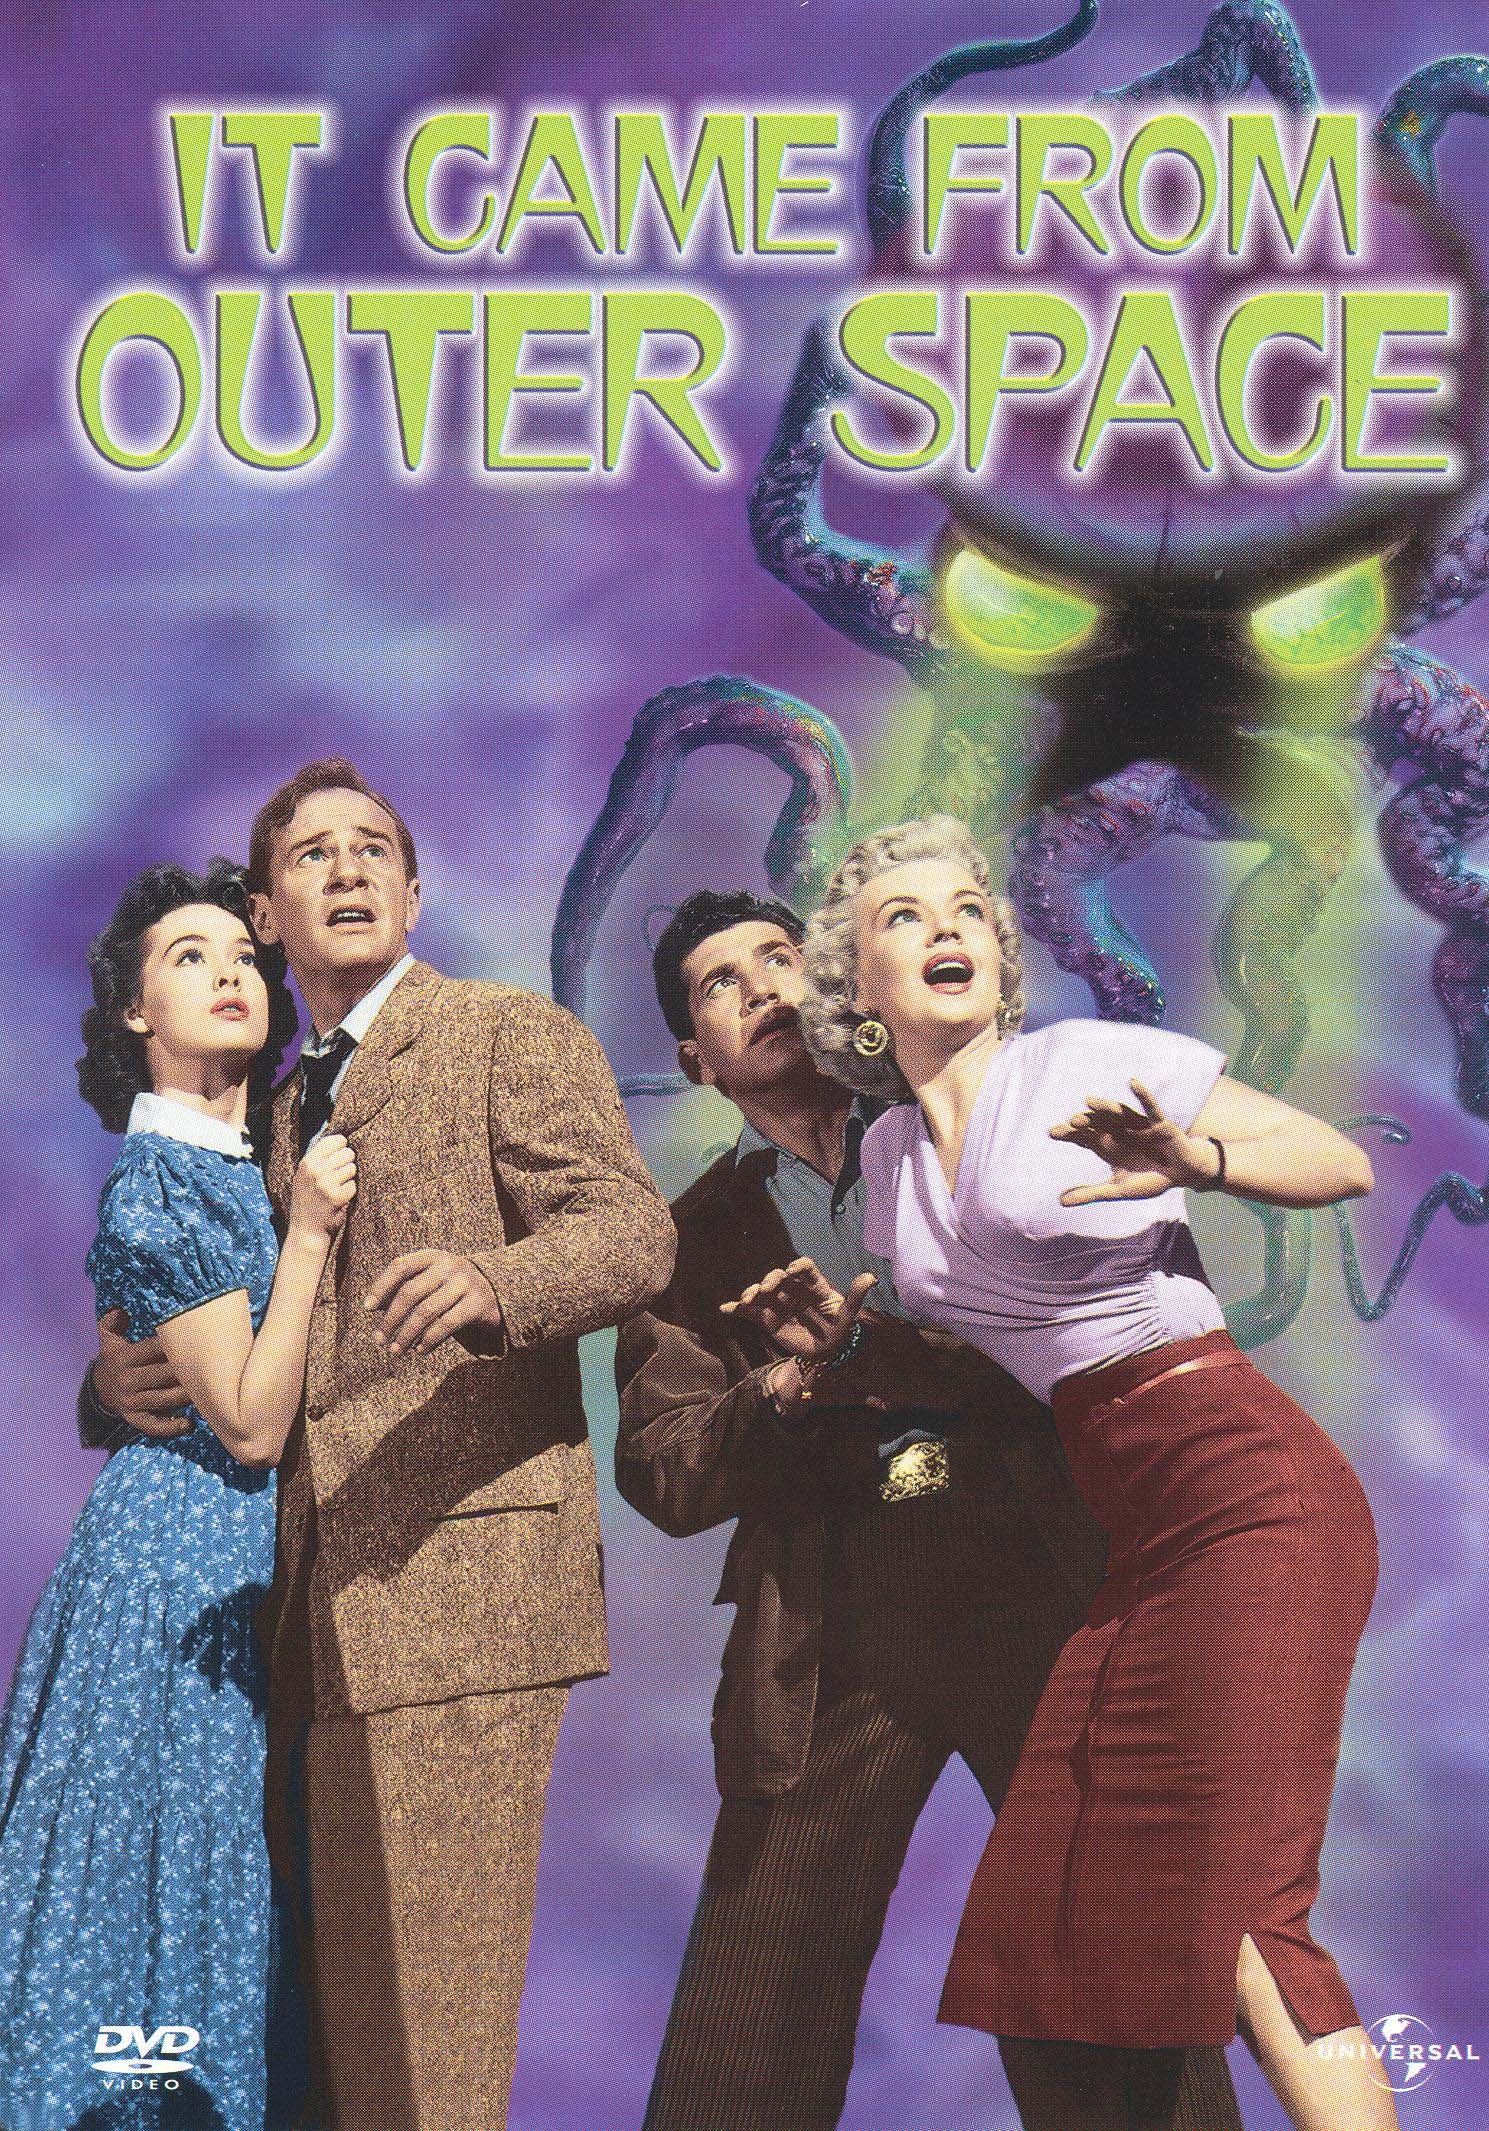 It Came From Outer Space cover art